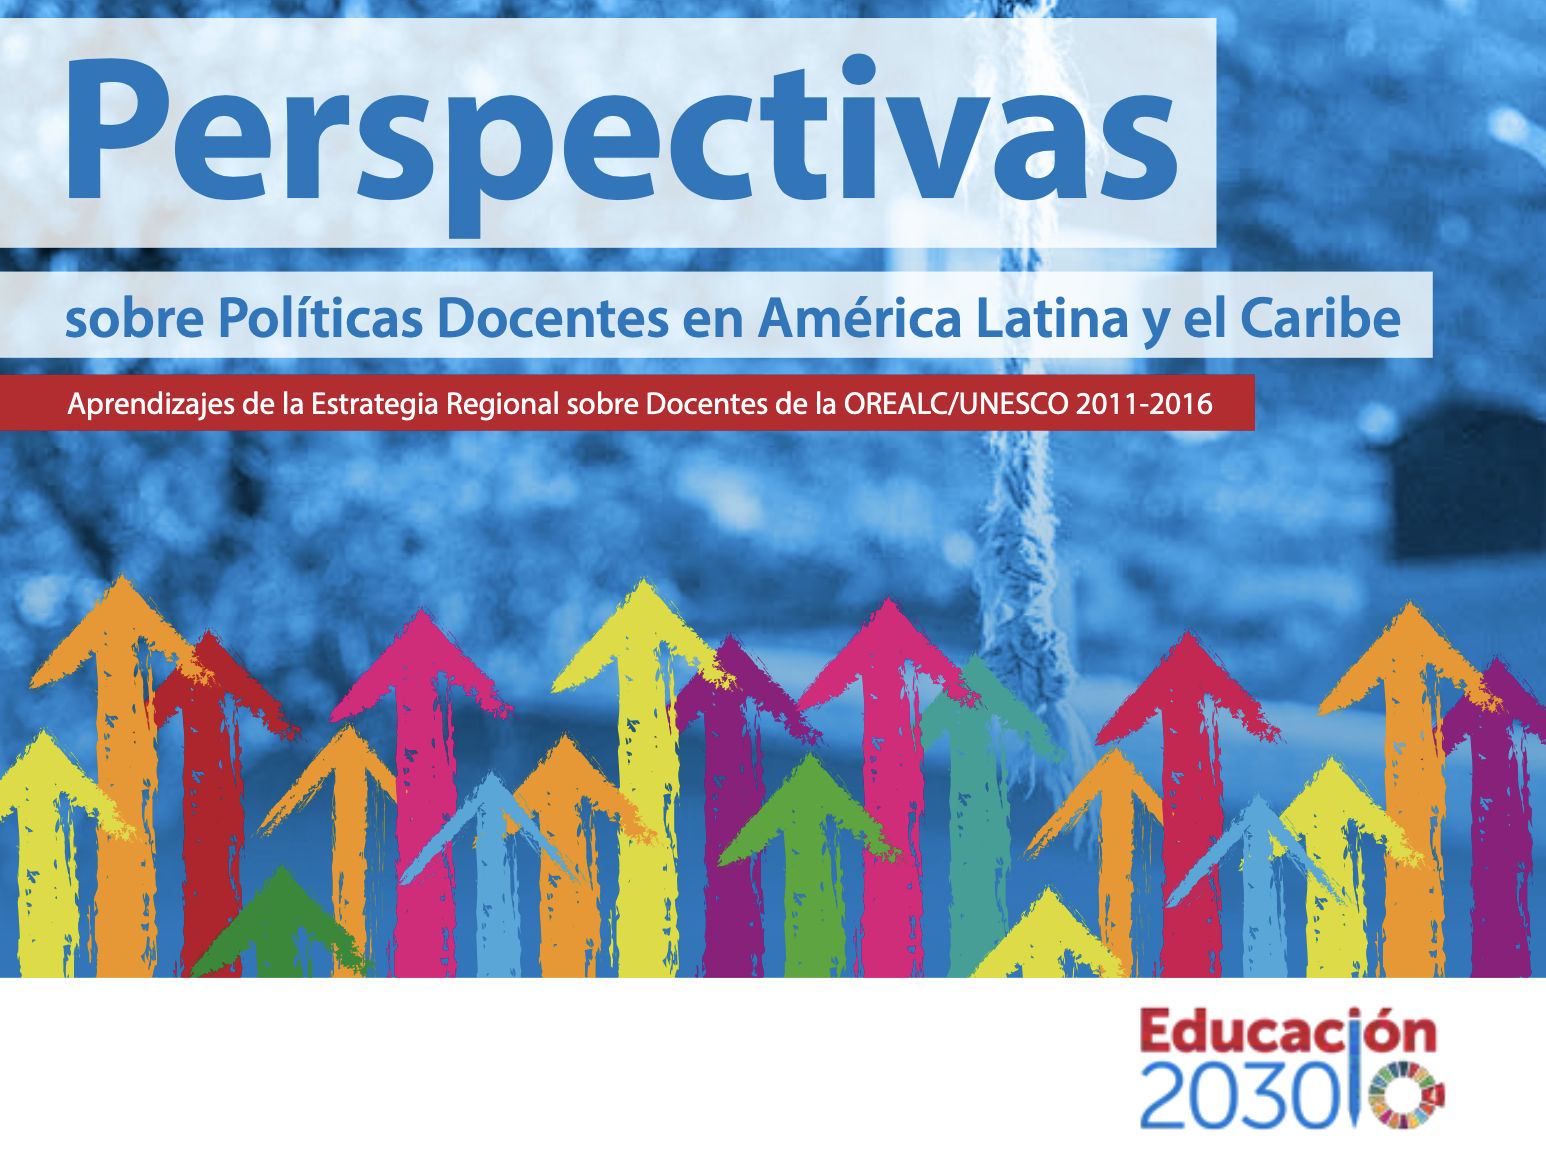 Perspectives on teacher-policy development in Latin America and the Caribbean: lessons learnt from the Regional Strategy on Teachers, OREALC/UNESCO 2011-2016